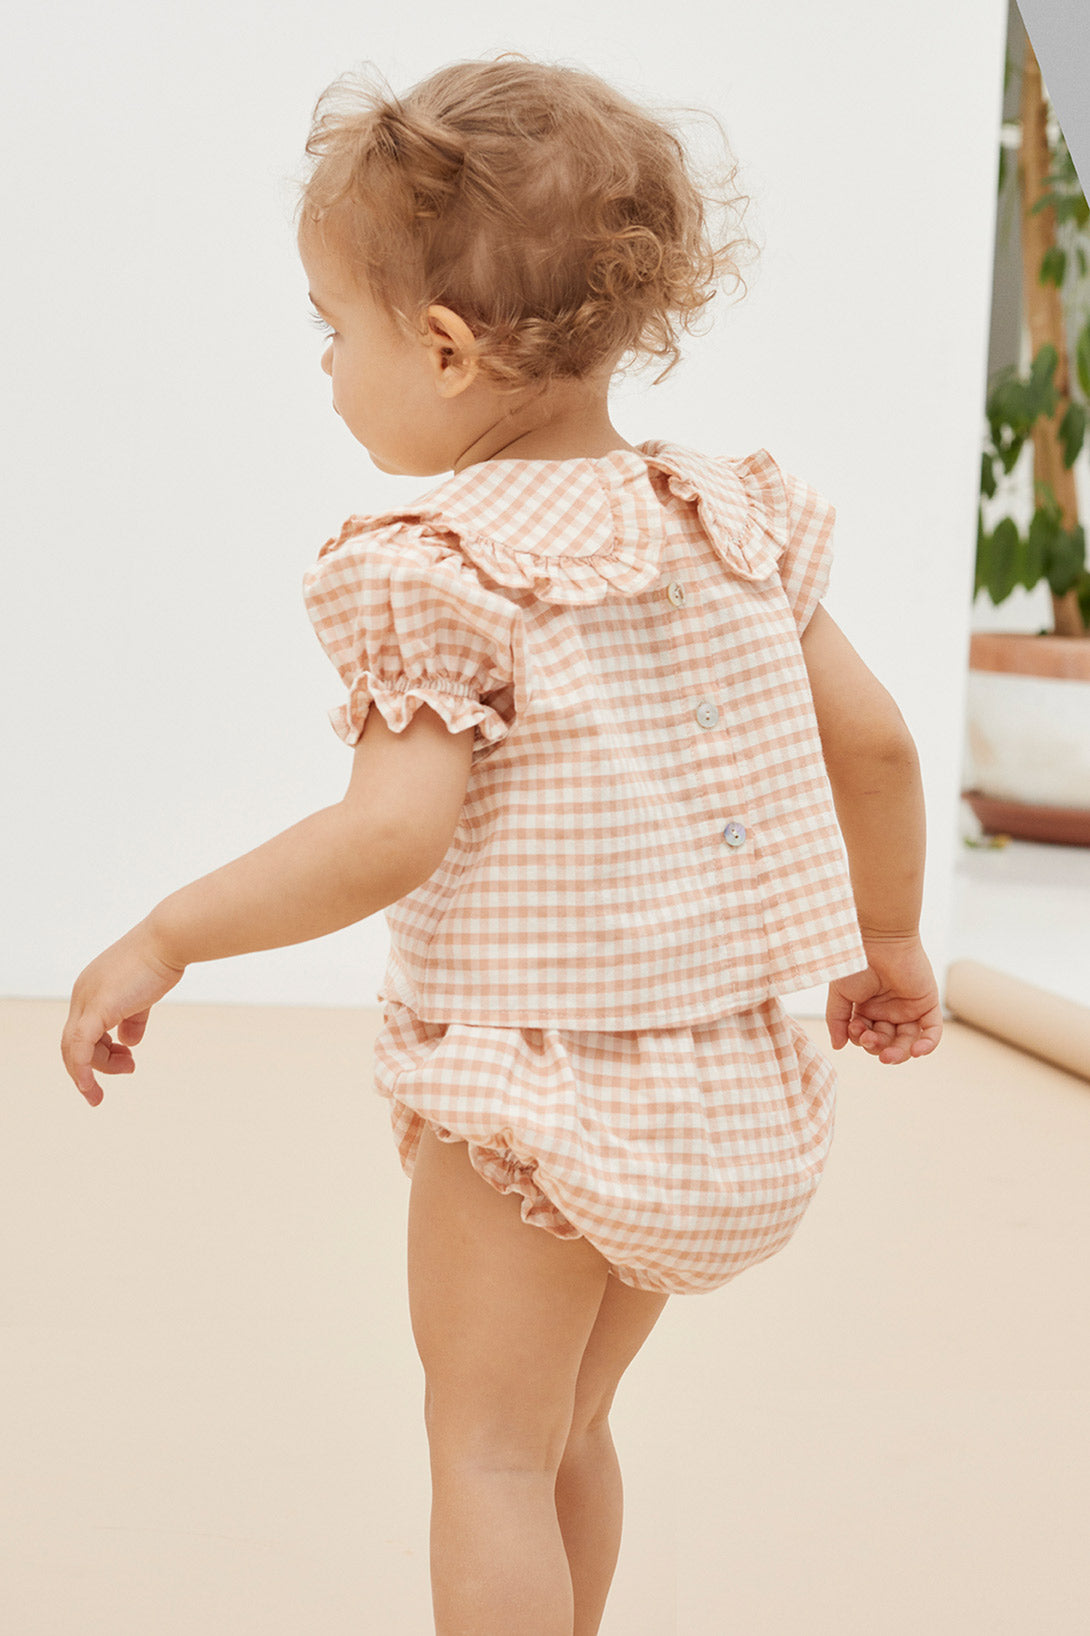 【the new society】【40％off】Petra Baby Blouse  Petra check　チェック柄ブラウス　12m,18m,24m  | Coucoubebe/ククベベ